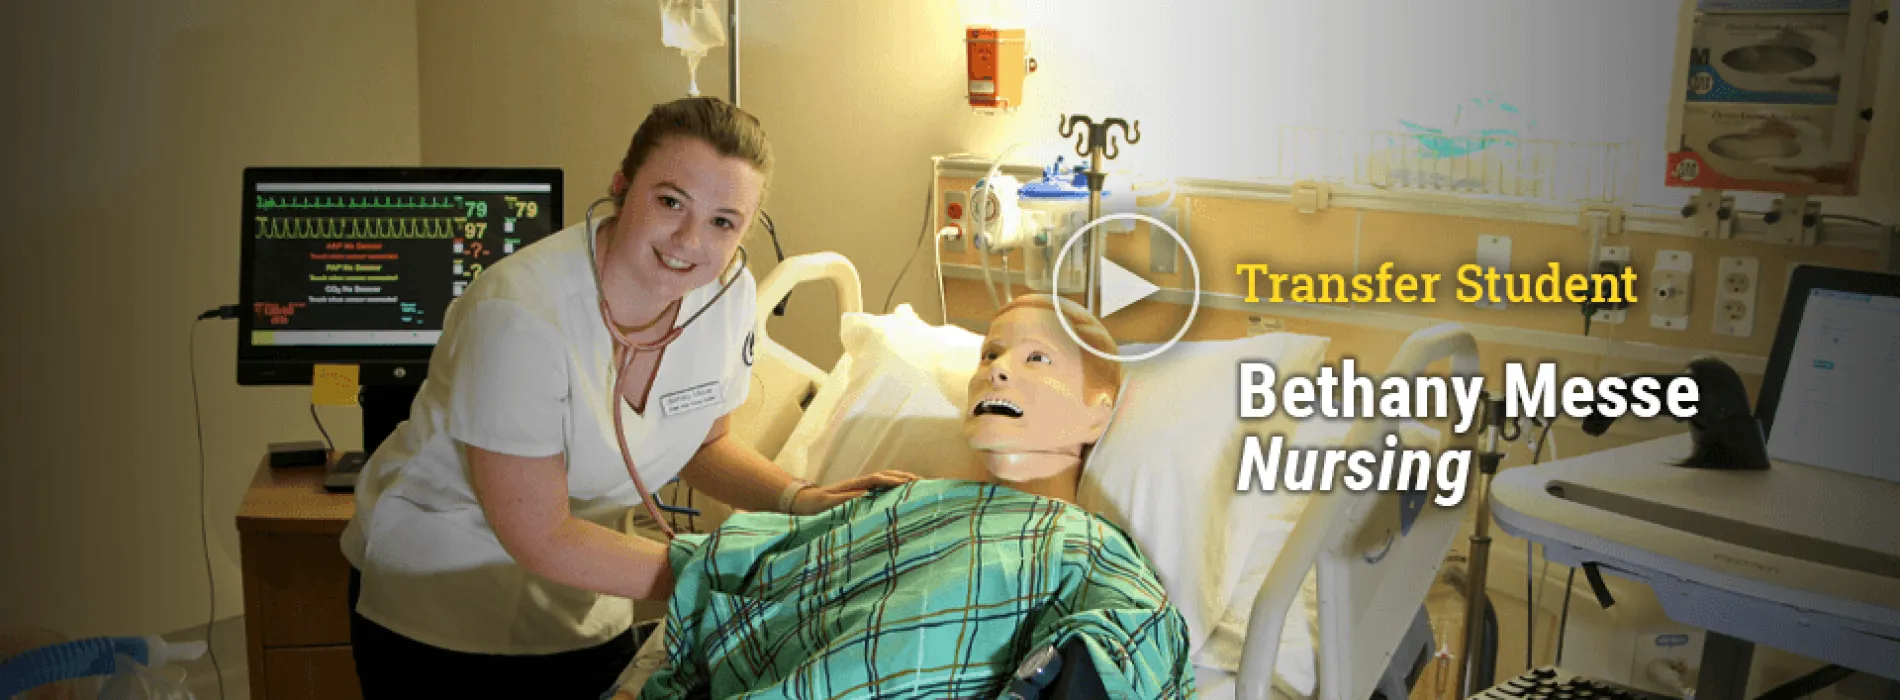 Link to video of: Transfer Student Bethany Messe, Nursing. Play button. Image of Bethany in nursing simulation lab.